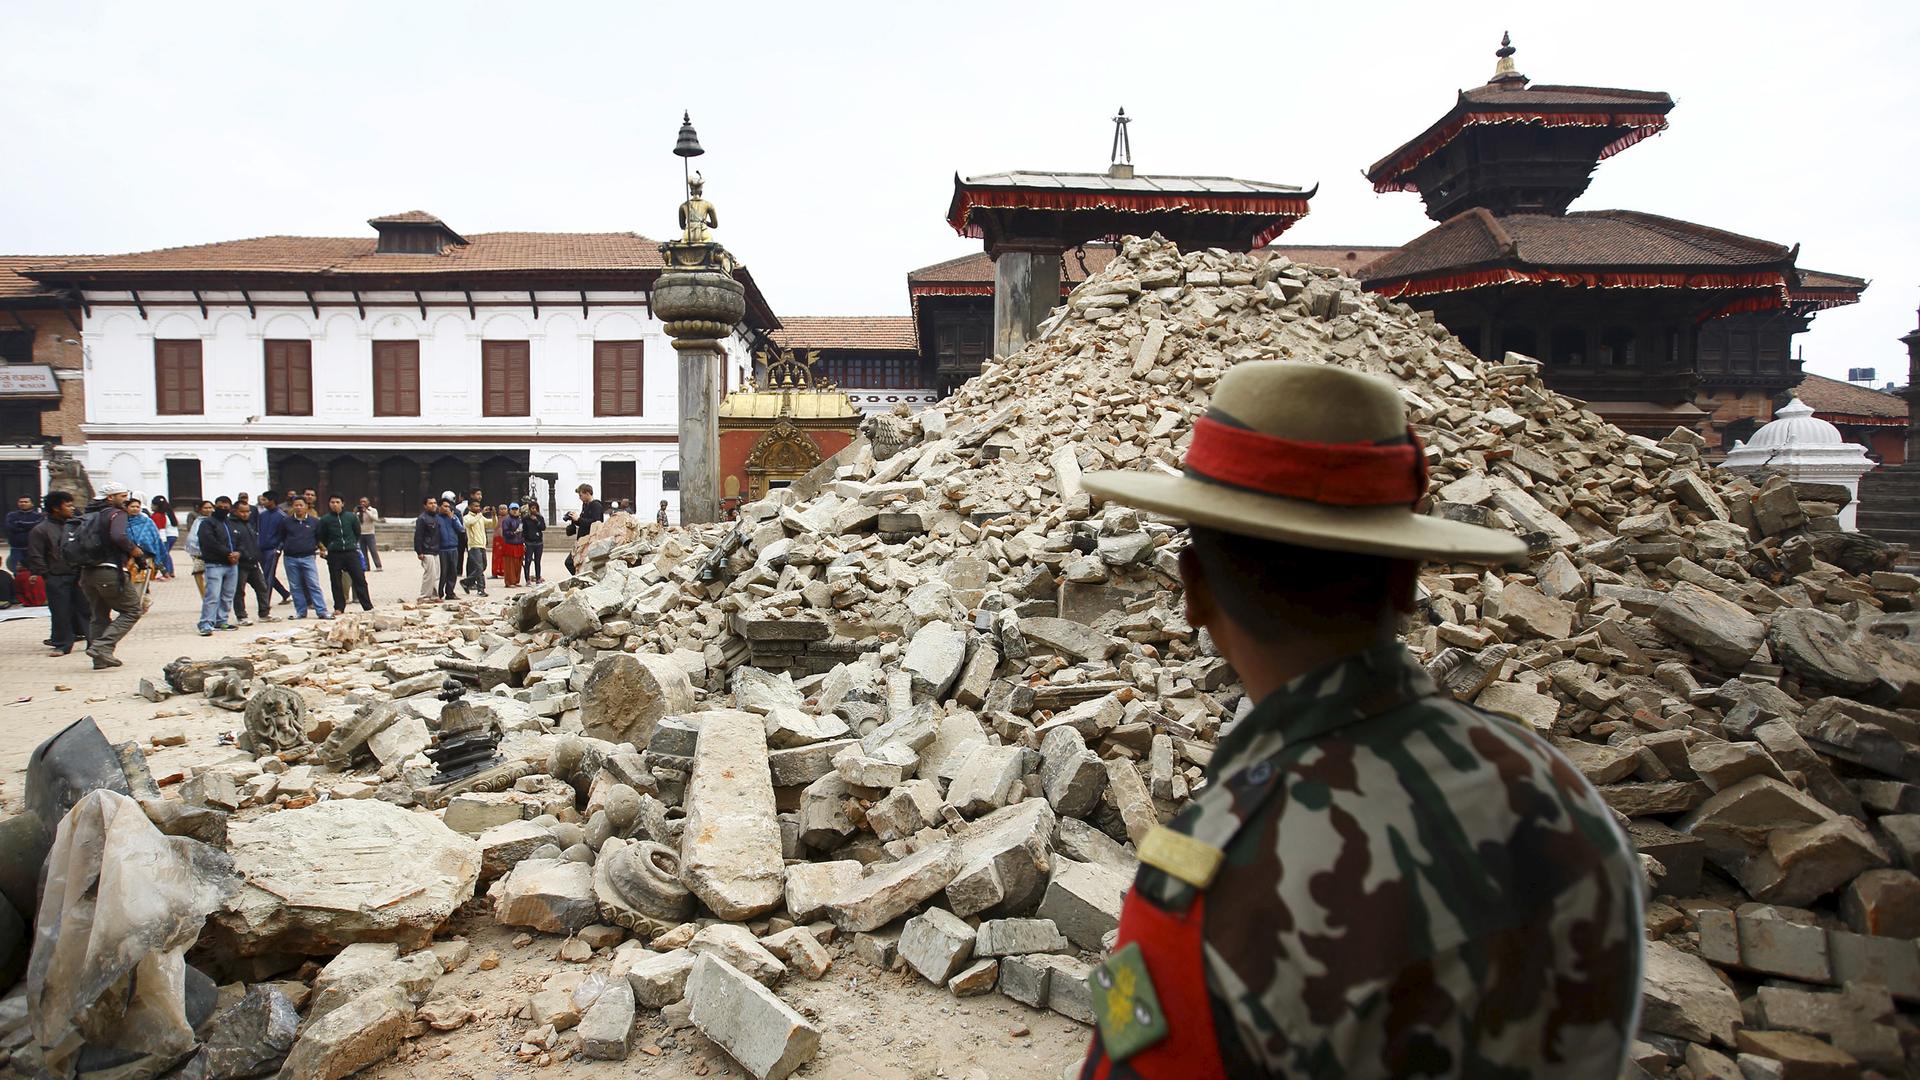 A Nepalese army personnel stands in front of a collapsed temple in Bhaktapur, Nepal a day after the April 25 earthquake rocked the country. The quake devastated the heavily crowded Kathmandu valley, killing thousands and triggering a deadly avalanche on M